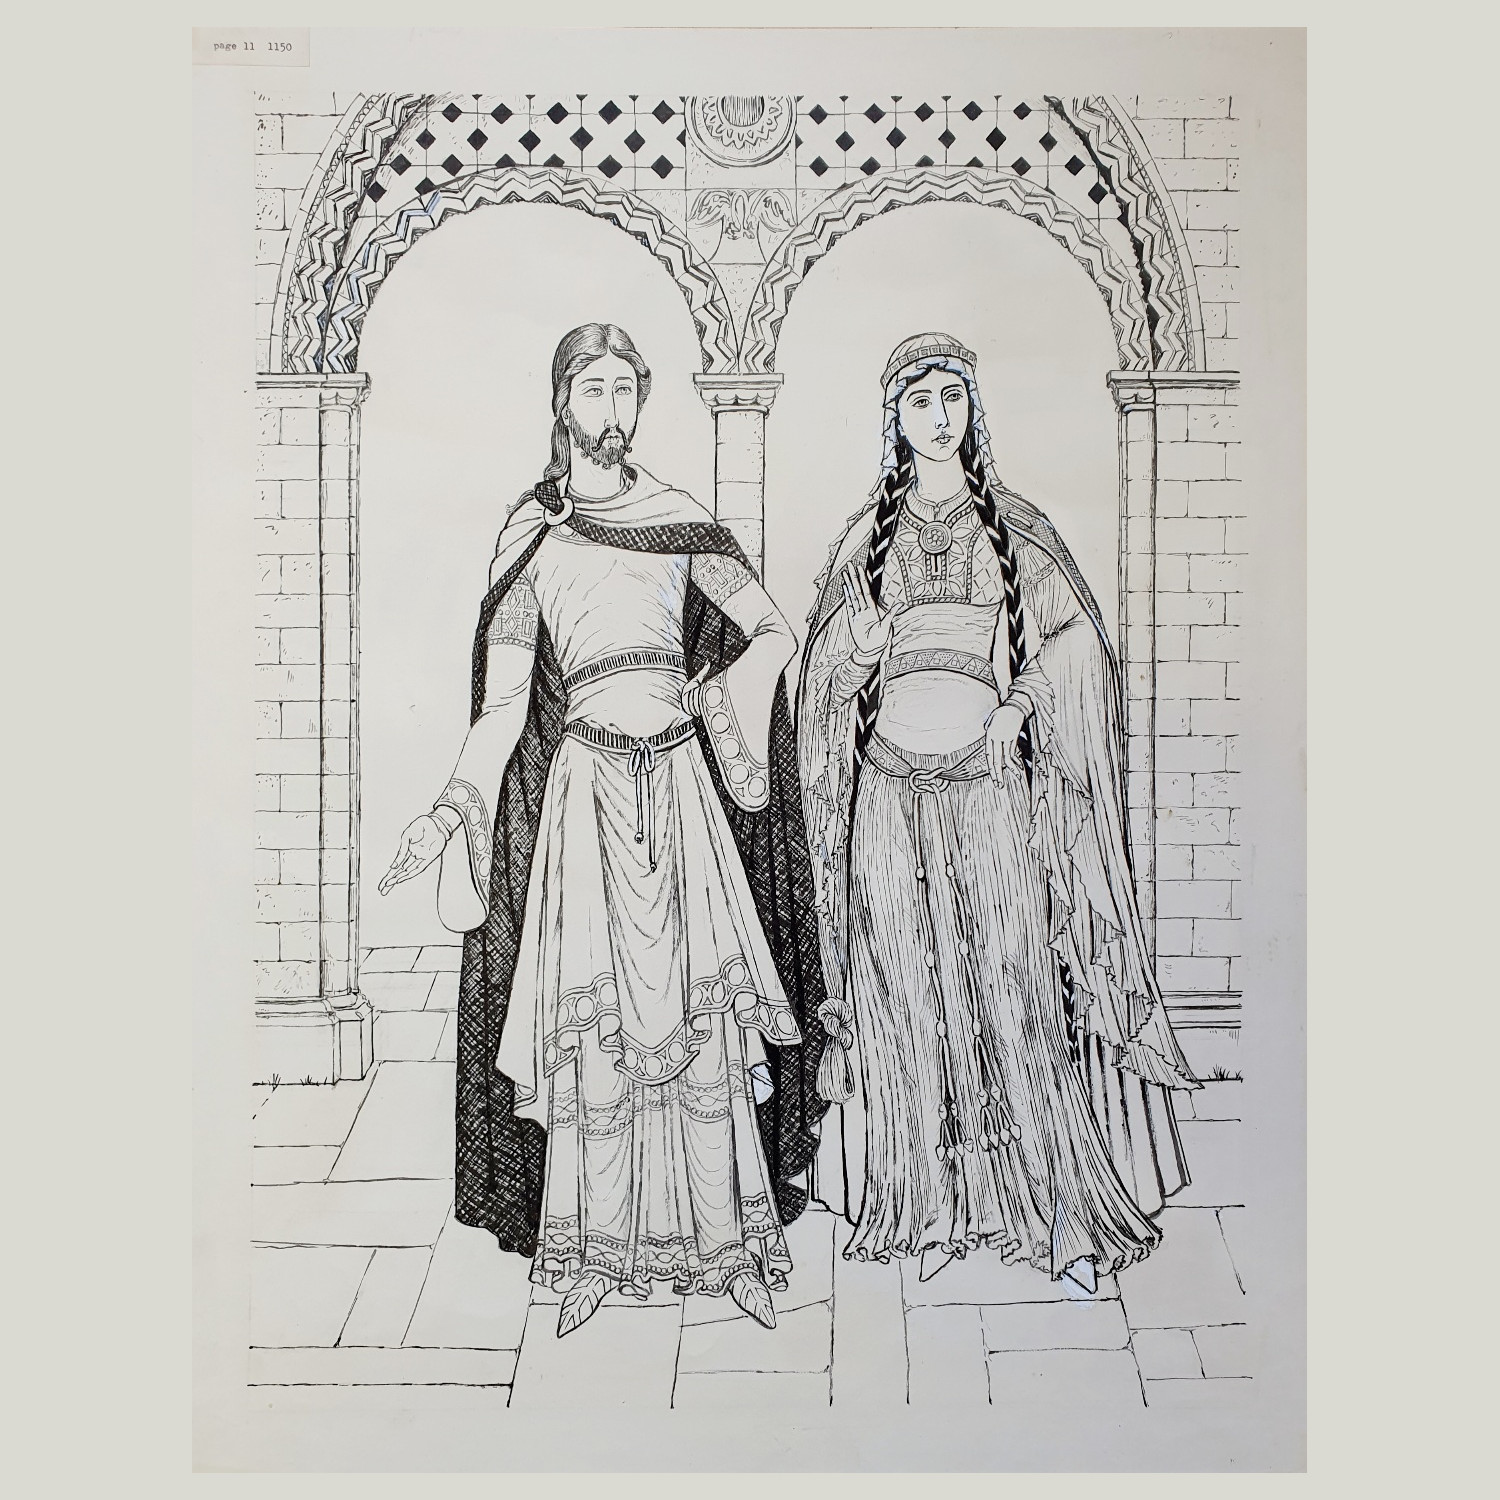 Original drawing by Margot Hamilton Hill depicting fashions from the reign of King Stephen, 1150